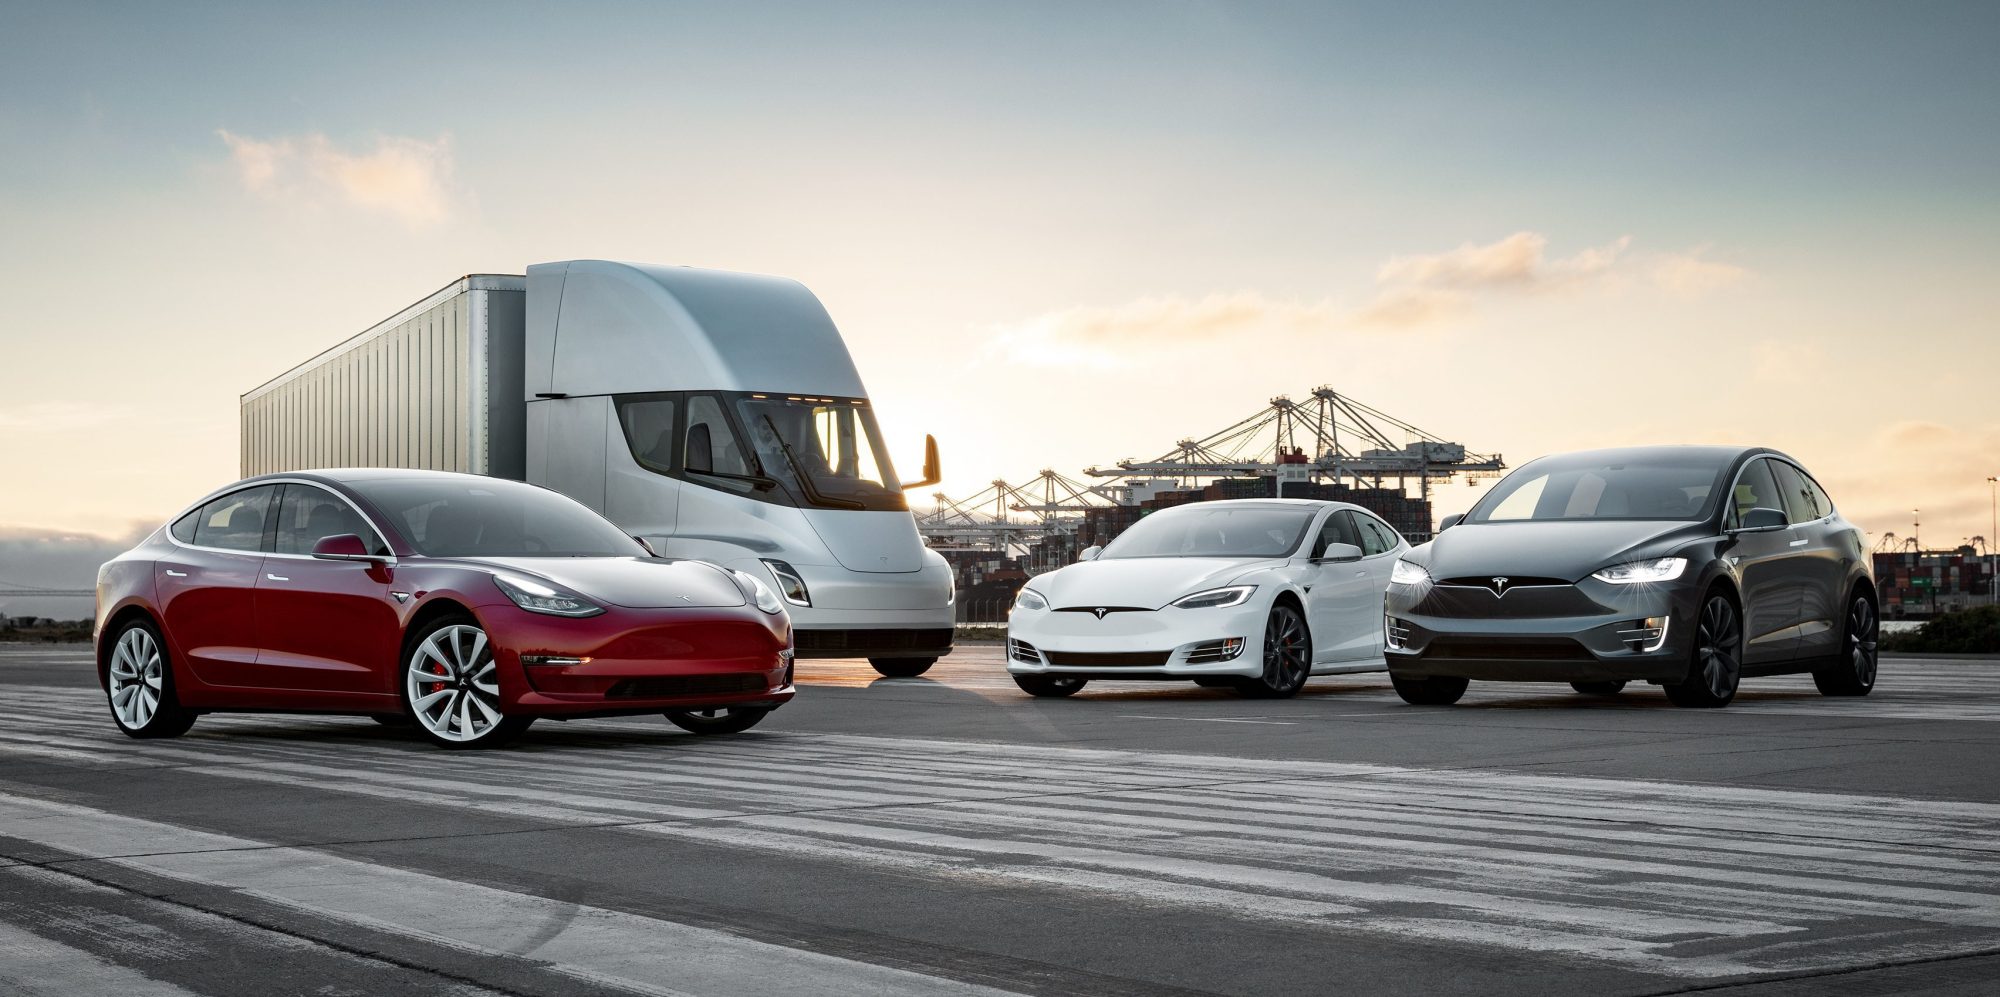 Tesla Q2 2020 Outstanding Safety Report Leading Into A New Industrial Standard